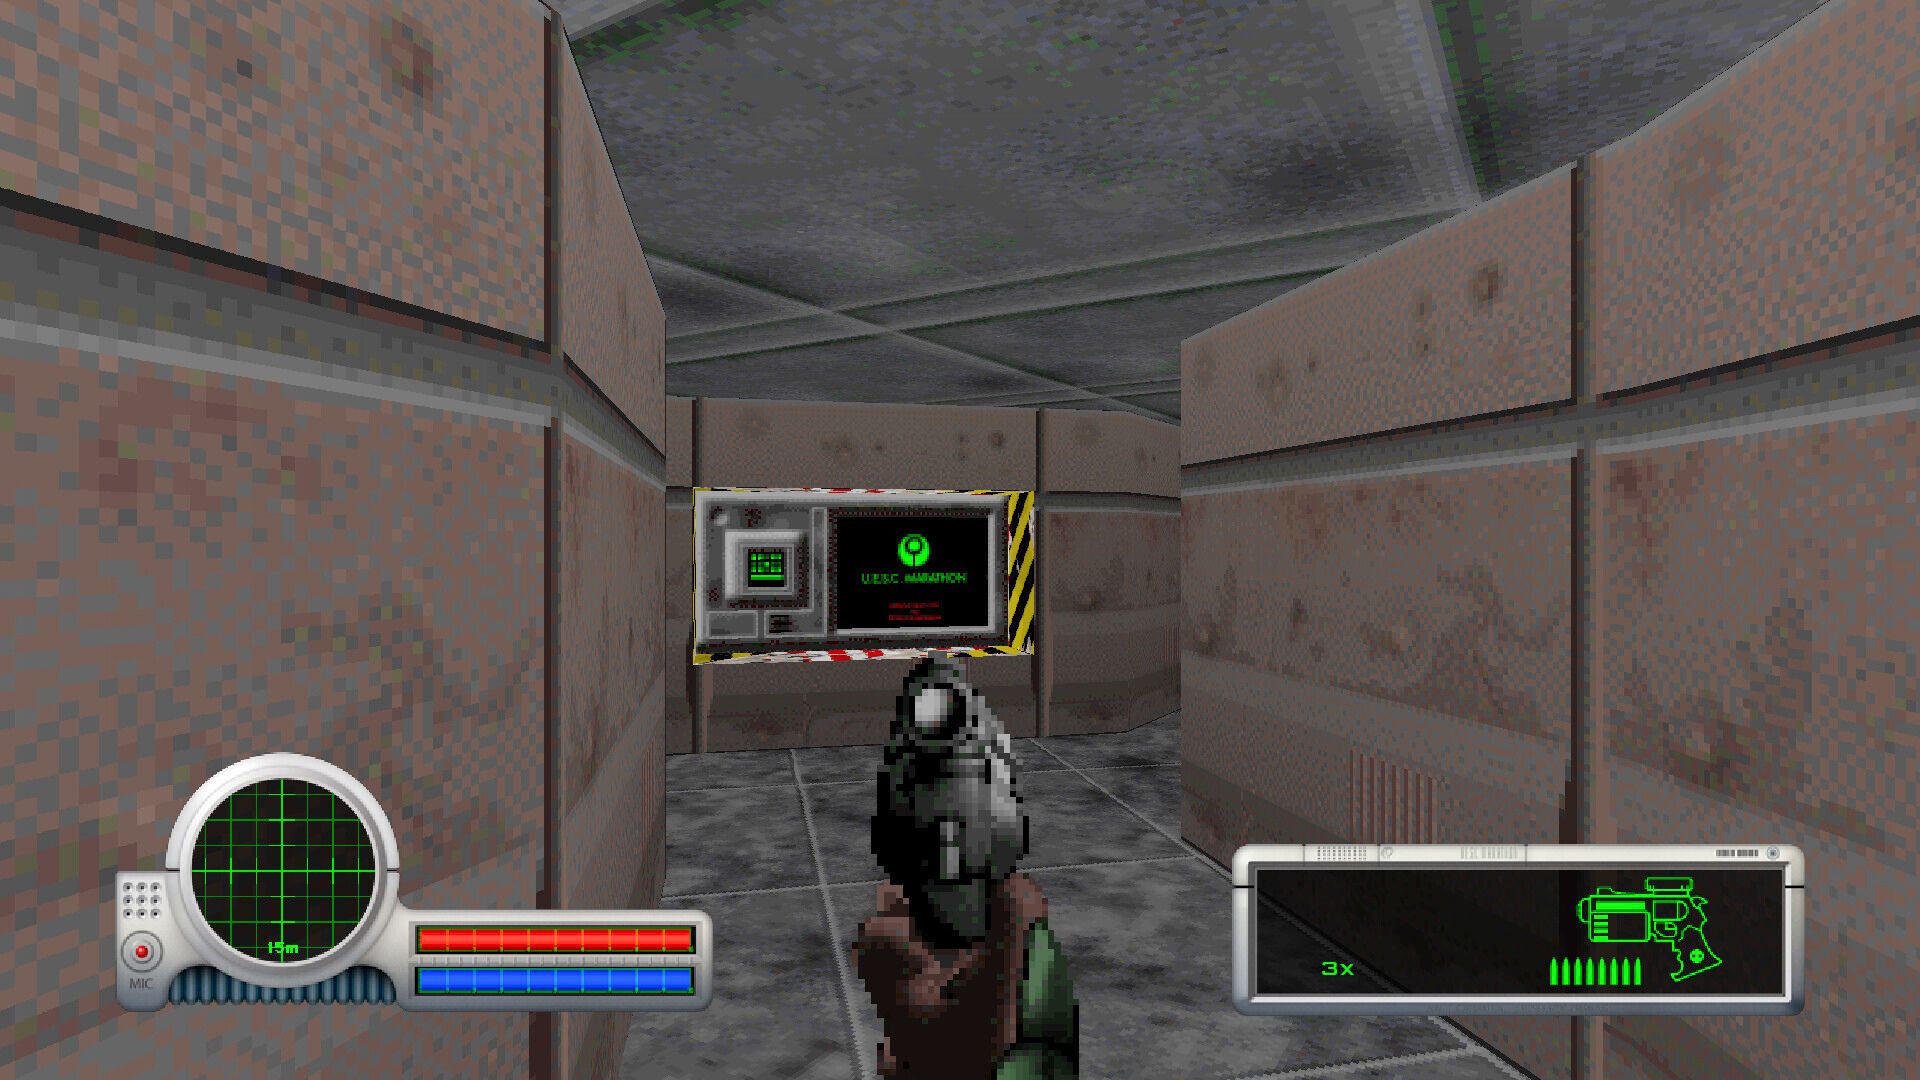 This classic '90s Doom rival appears to be finally coming to Steam